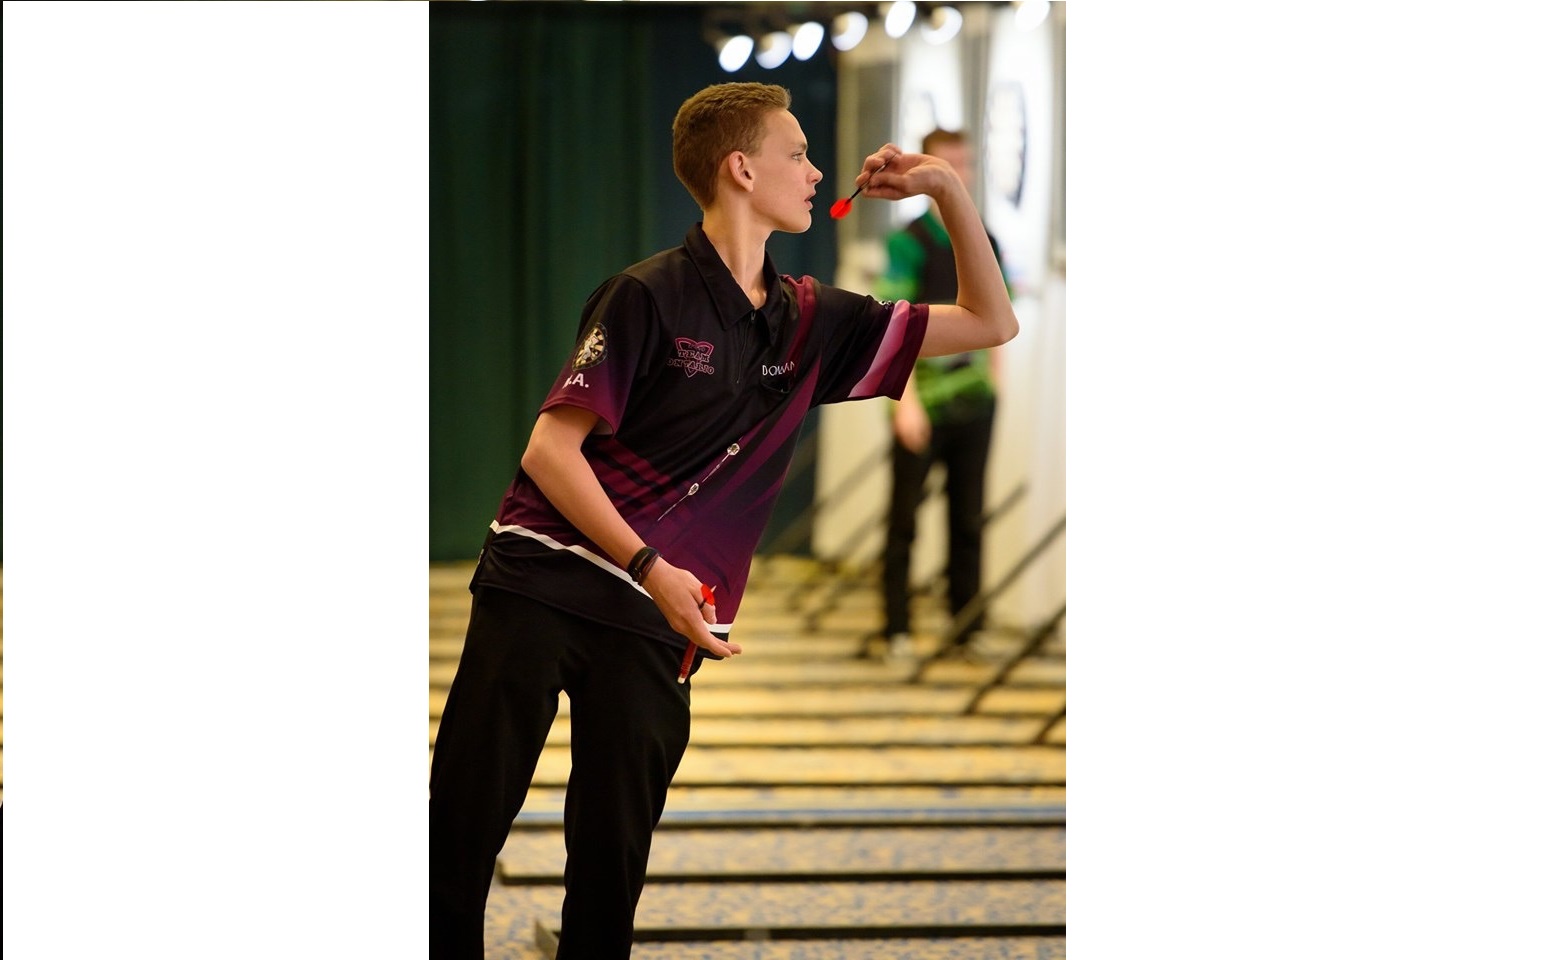 Donovan Pilon qualifies for World Cup in darts